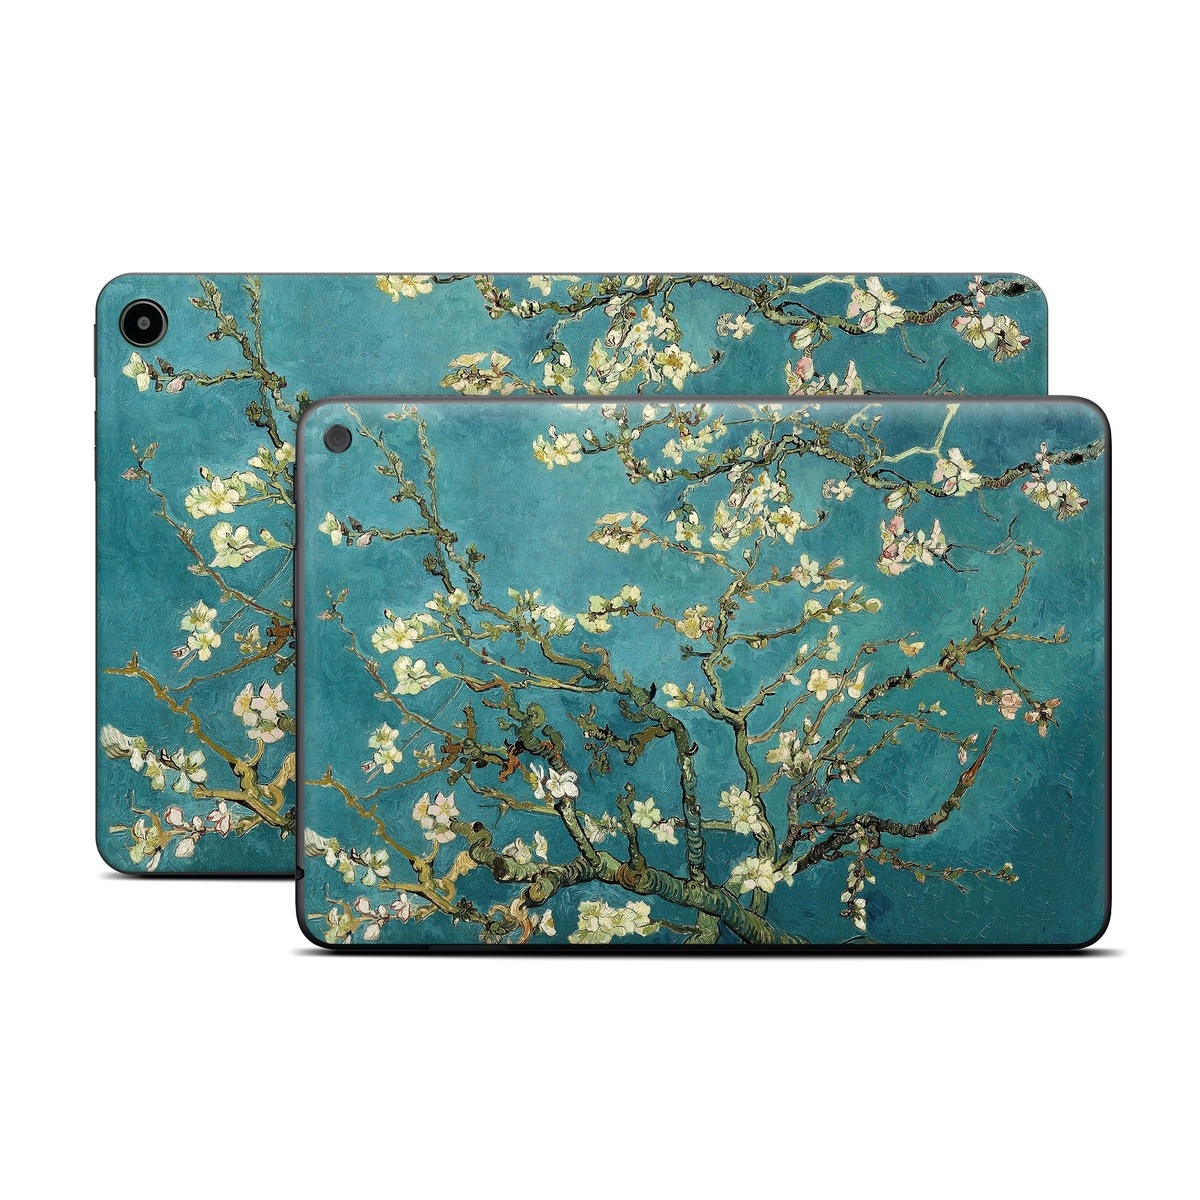 Amazon Fire Tablet Series Skin Skin design of Tree, Branch, Plant, Flower, Blossom, Spring, Woody plant, Perennial plant, with blue, black, gray, green colors